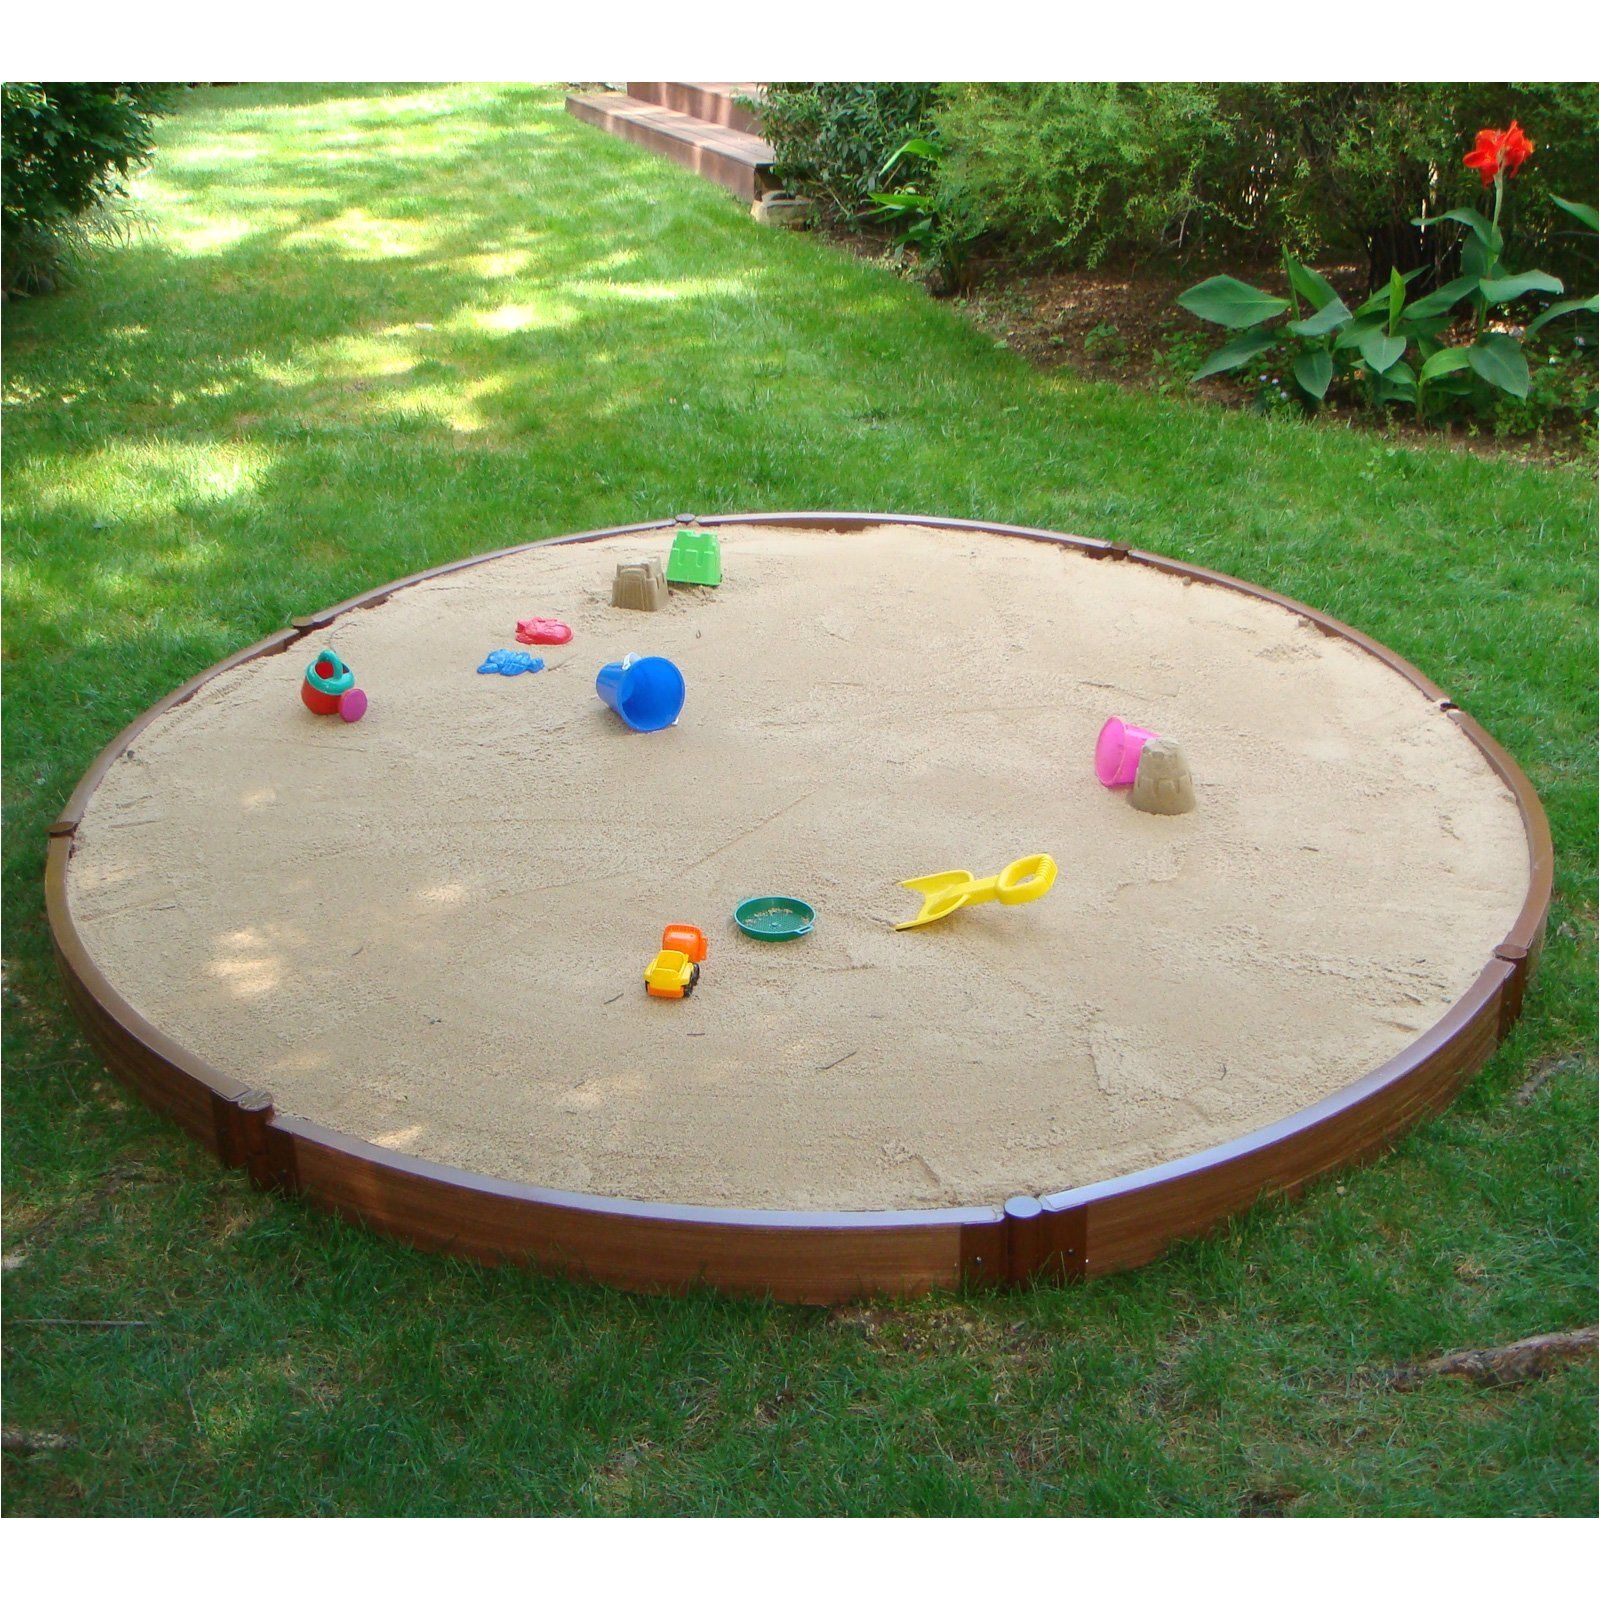 circular sandbox to replace current septic tank disguise could use retaining wall stones instead